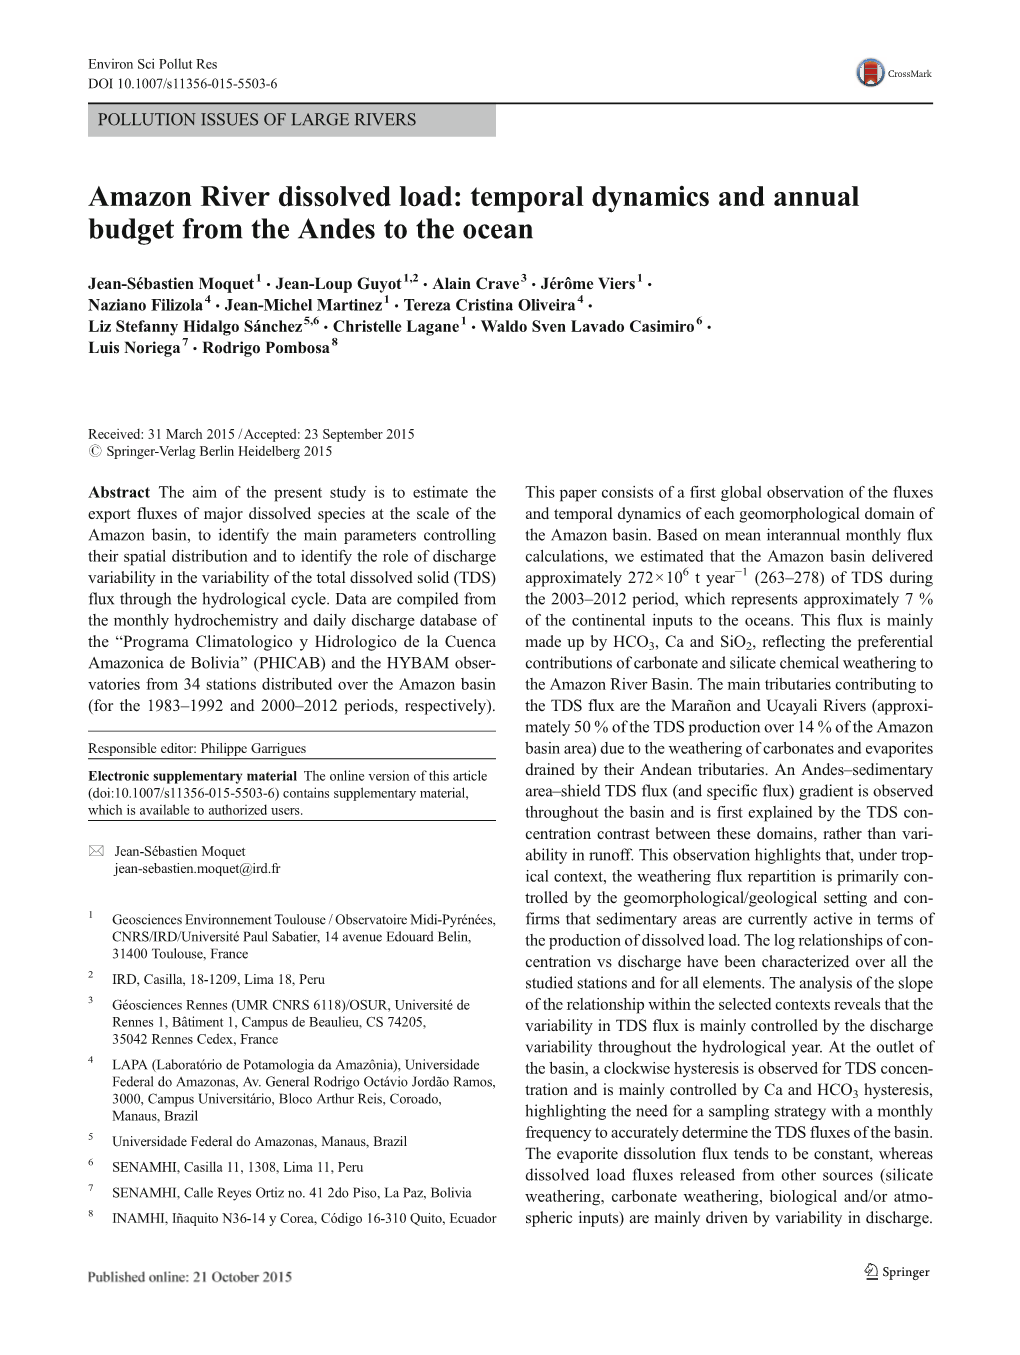 Amazon River Dissolved Load: Temporal Dynamics and Annual Budget from the Andes to the Ocean